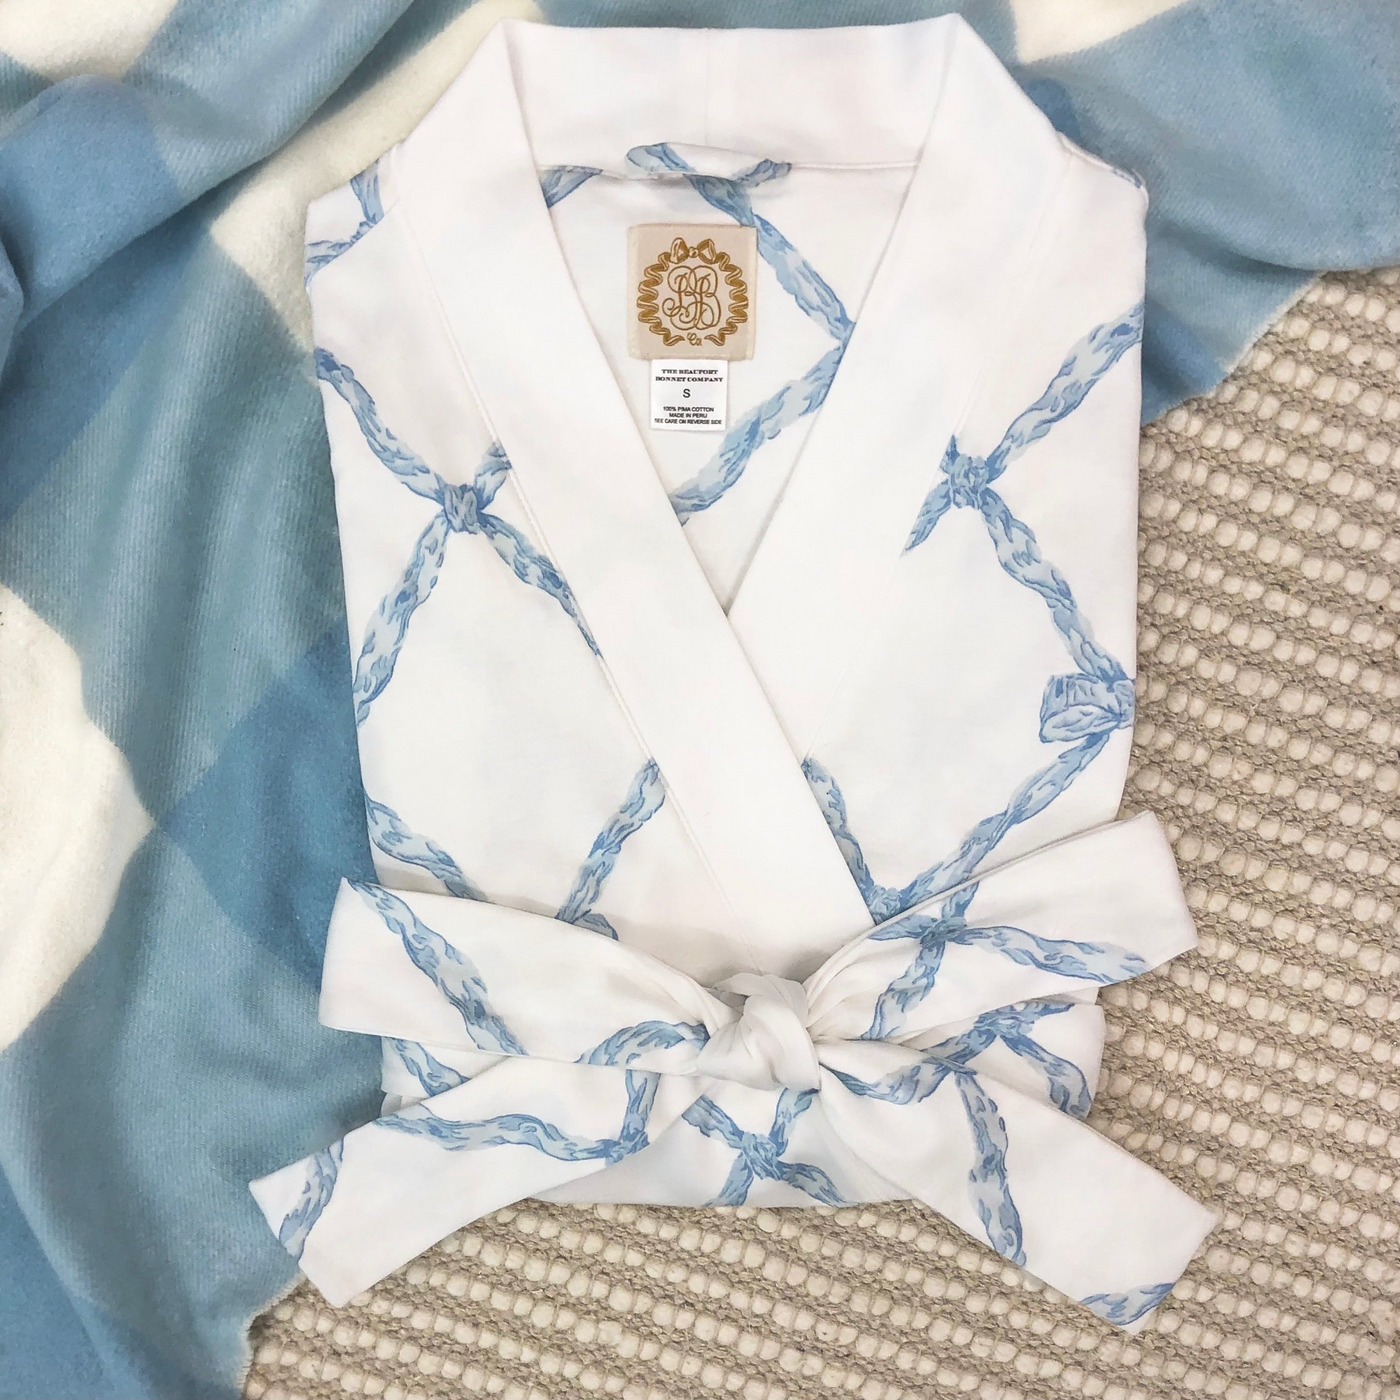 Ready Or Not Robe (Ladies) - Buckhead Blue Belle Meade Bow With Worth Avenue White